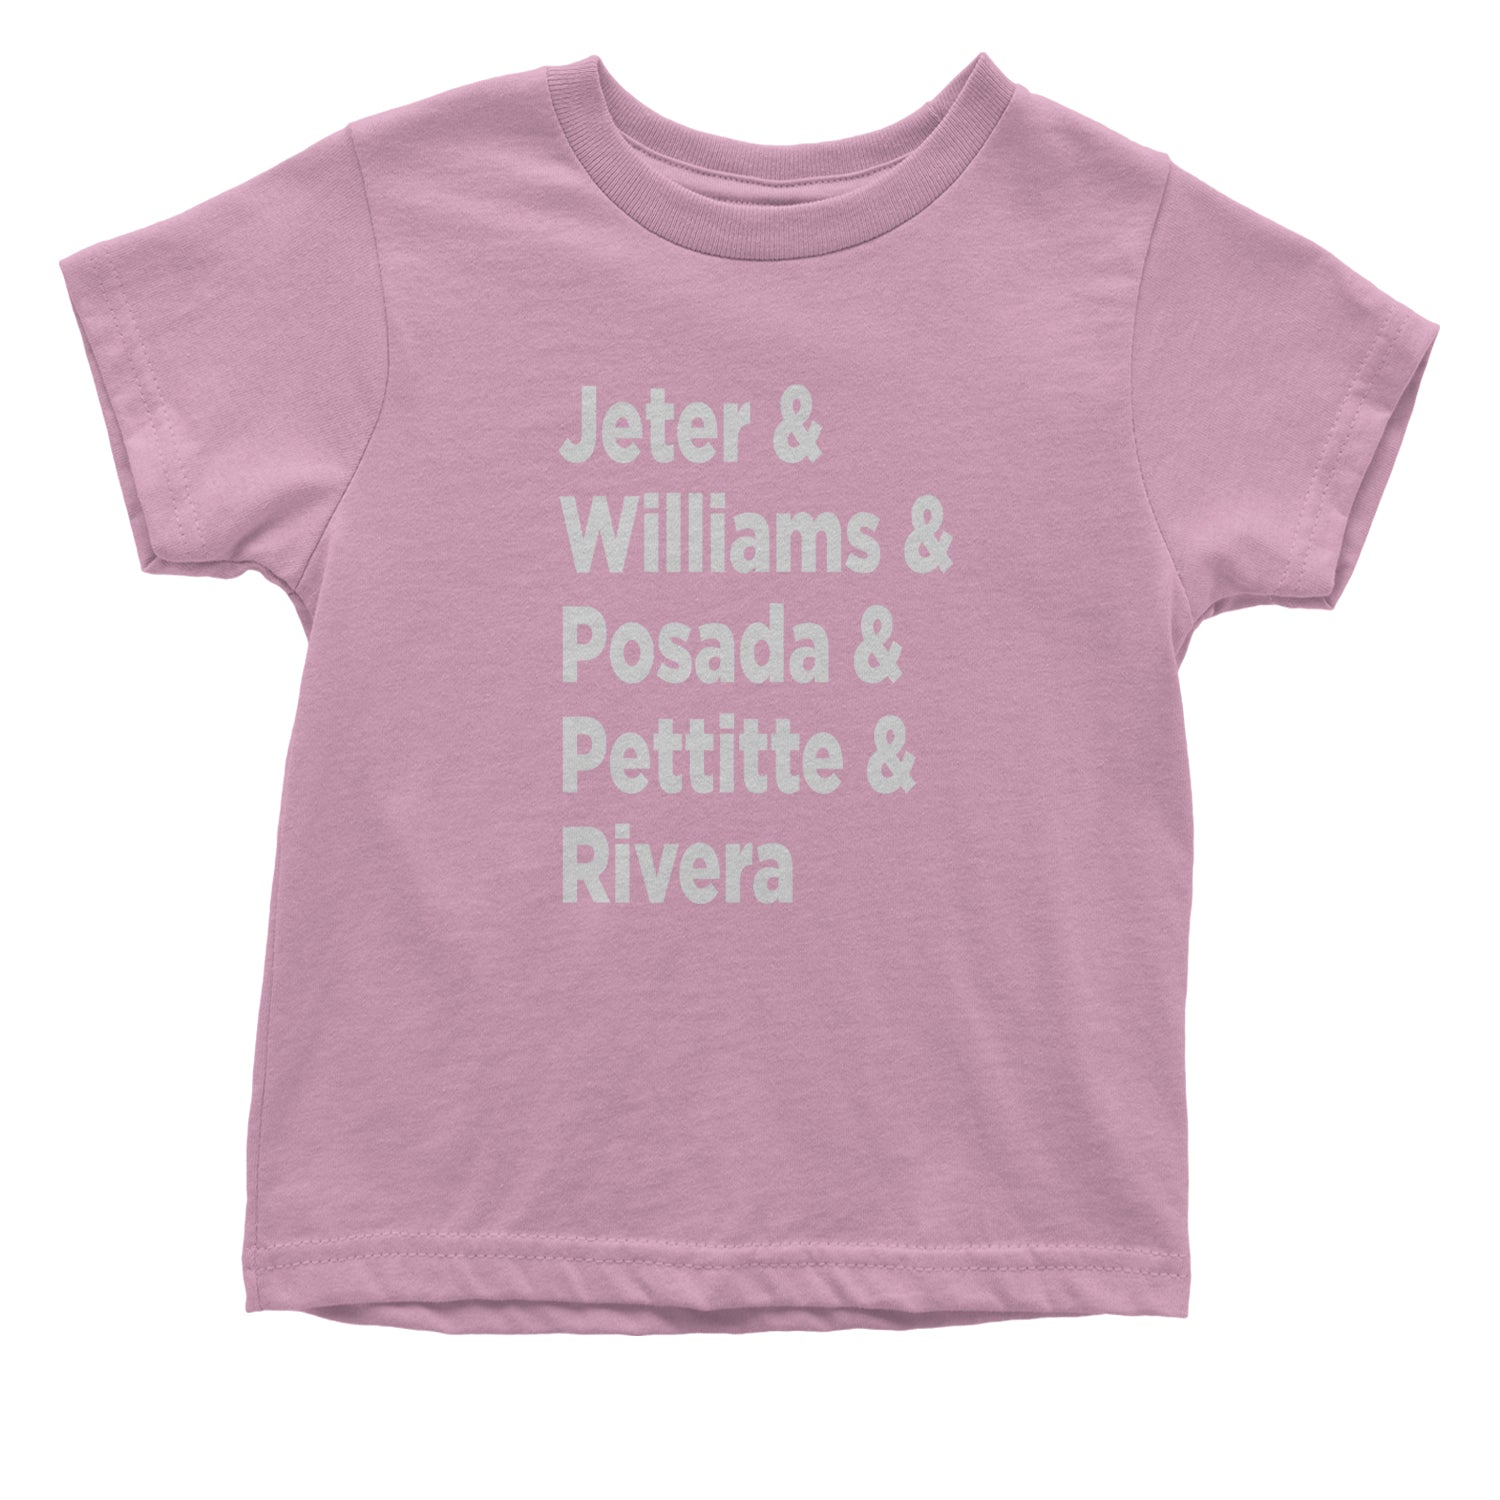 Jeter and Williams and Posada and Pettitte and Rivera Infant One-Piece Romper Bodysuit and Toddler T-shirt baseball, comes, here, judge, the by Expression Tees